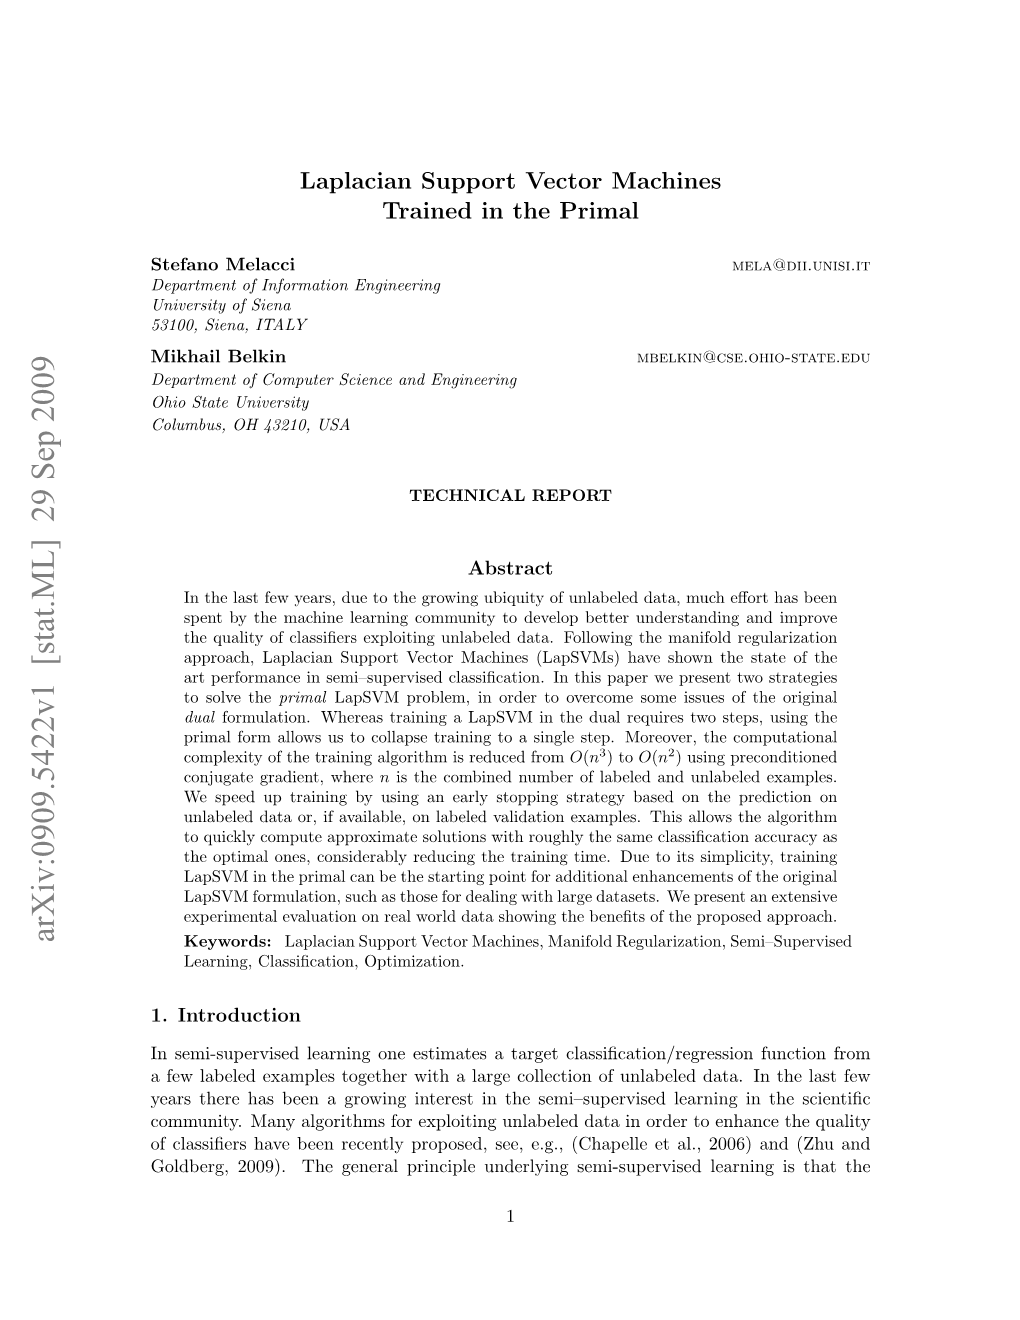 Laplacian Support Vector Machines Trained in the Primal